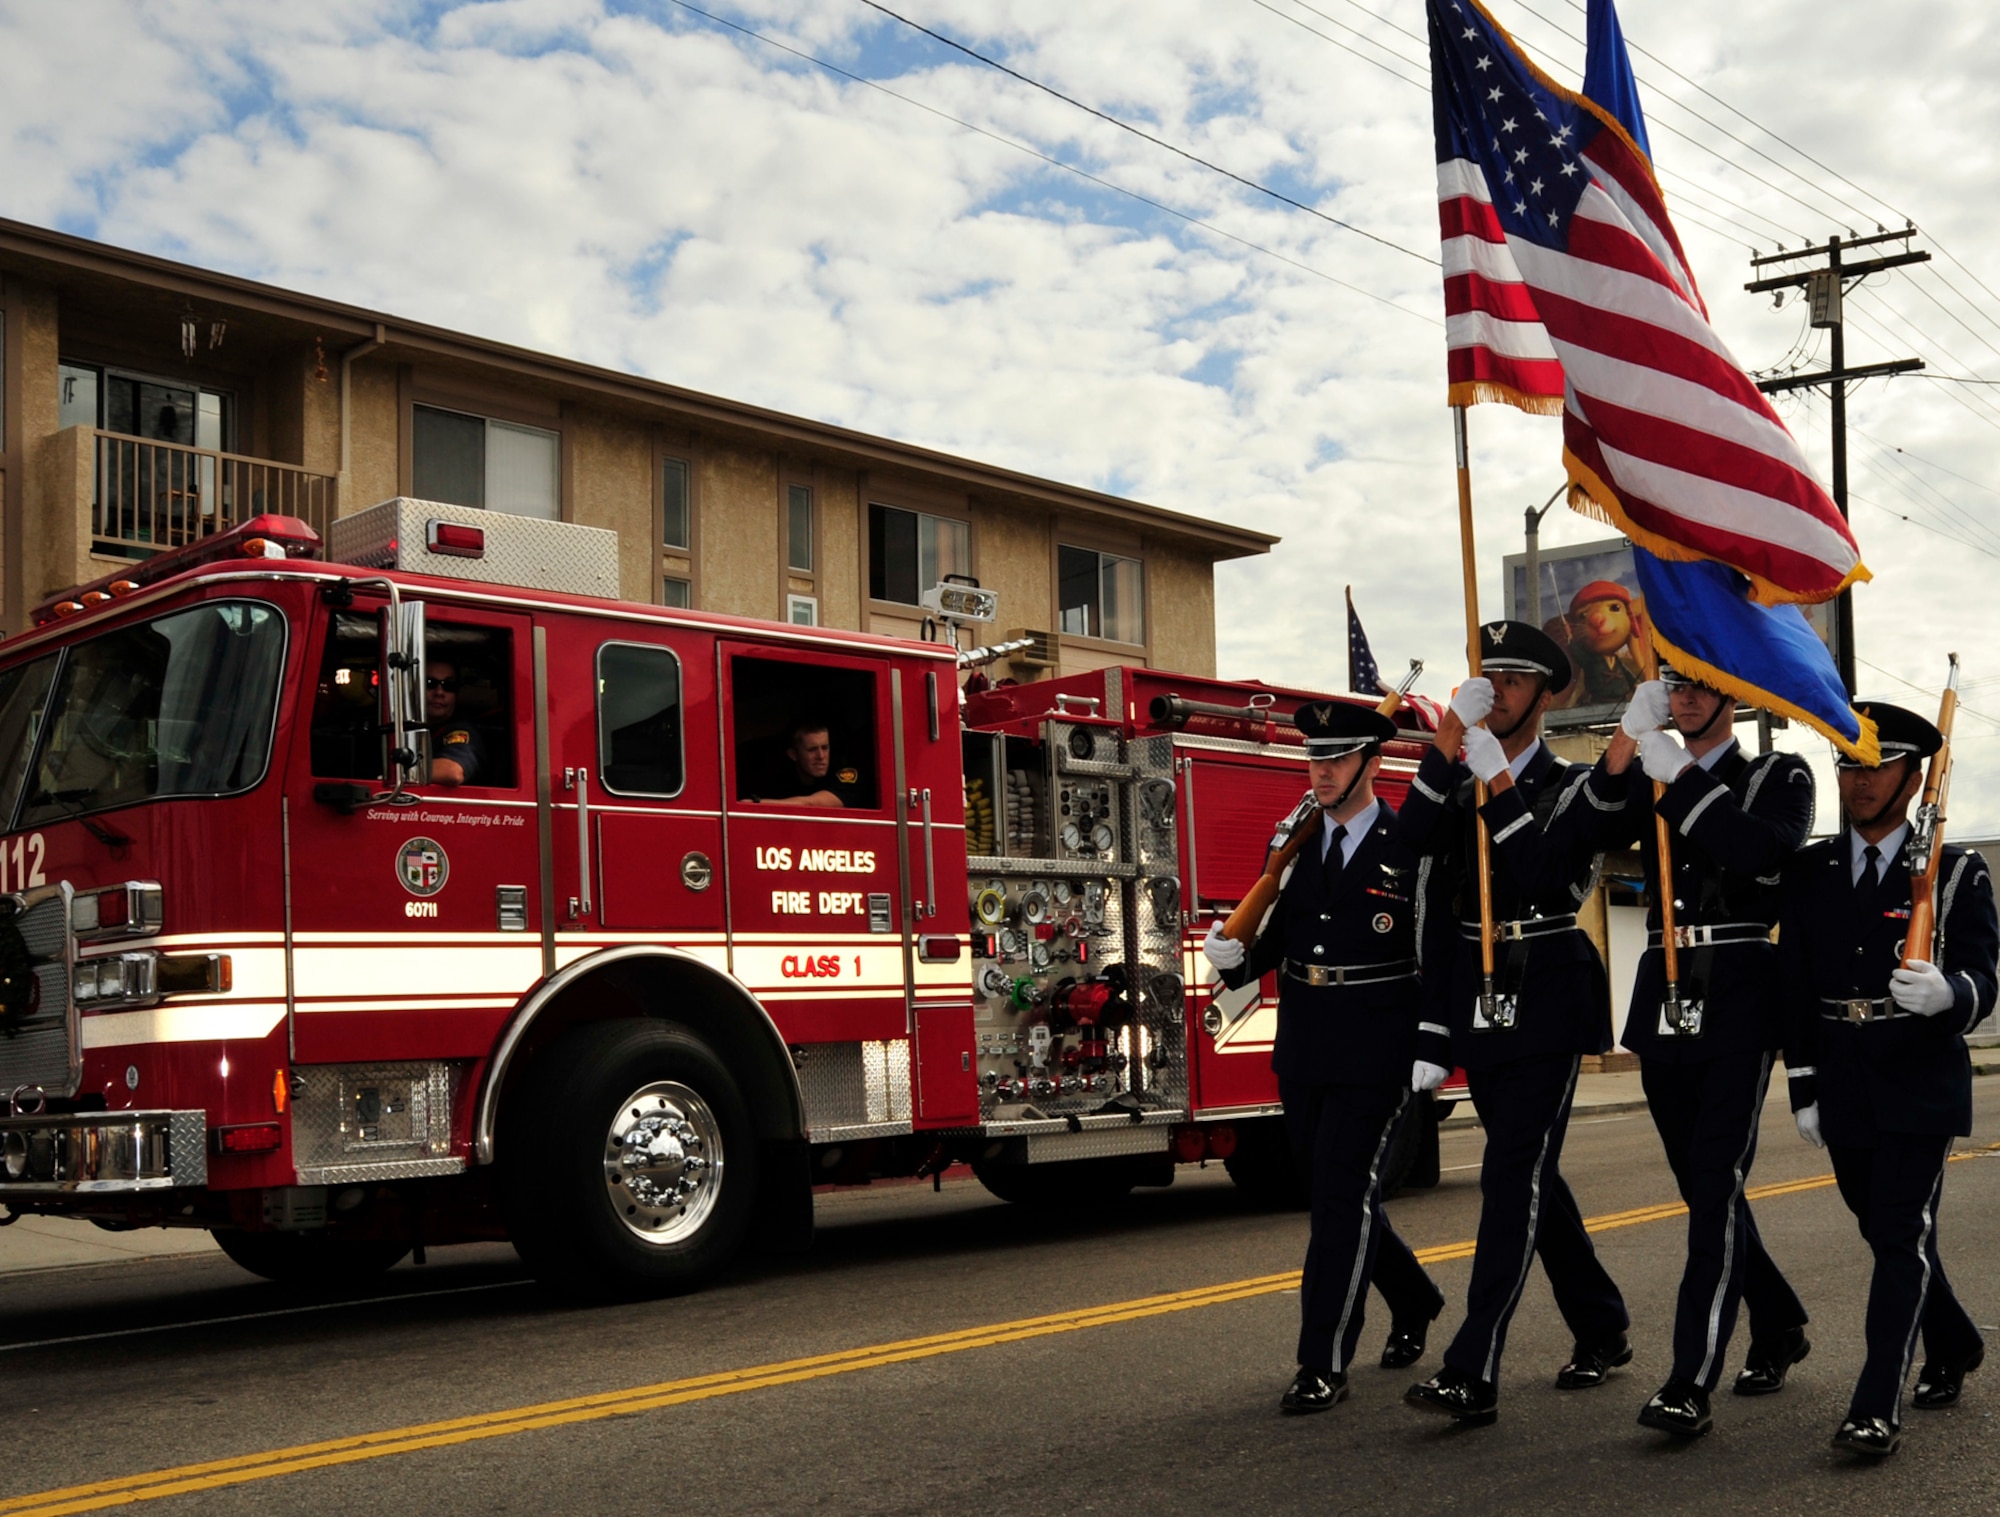 An LAAFB Honor Guard marched in the annual San Pedro Holiday parade, which included local dignitaries, marching bands and community groups. (Photo by Lou Hernadez)